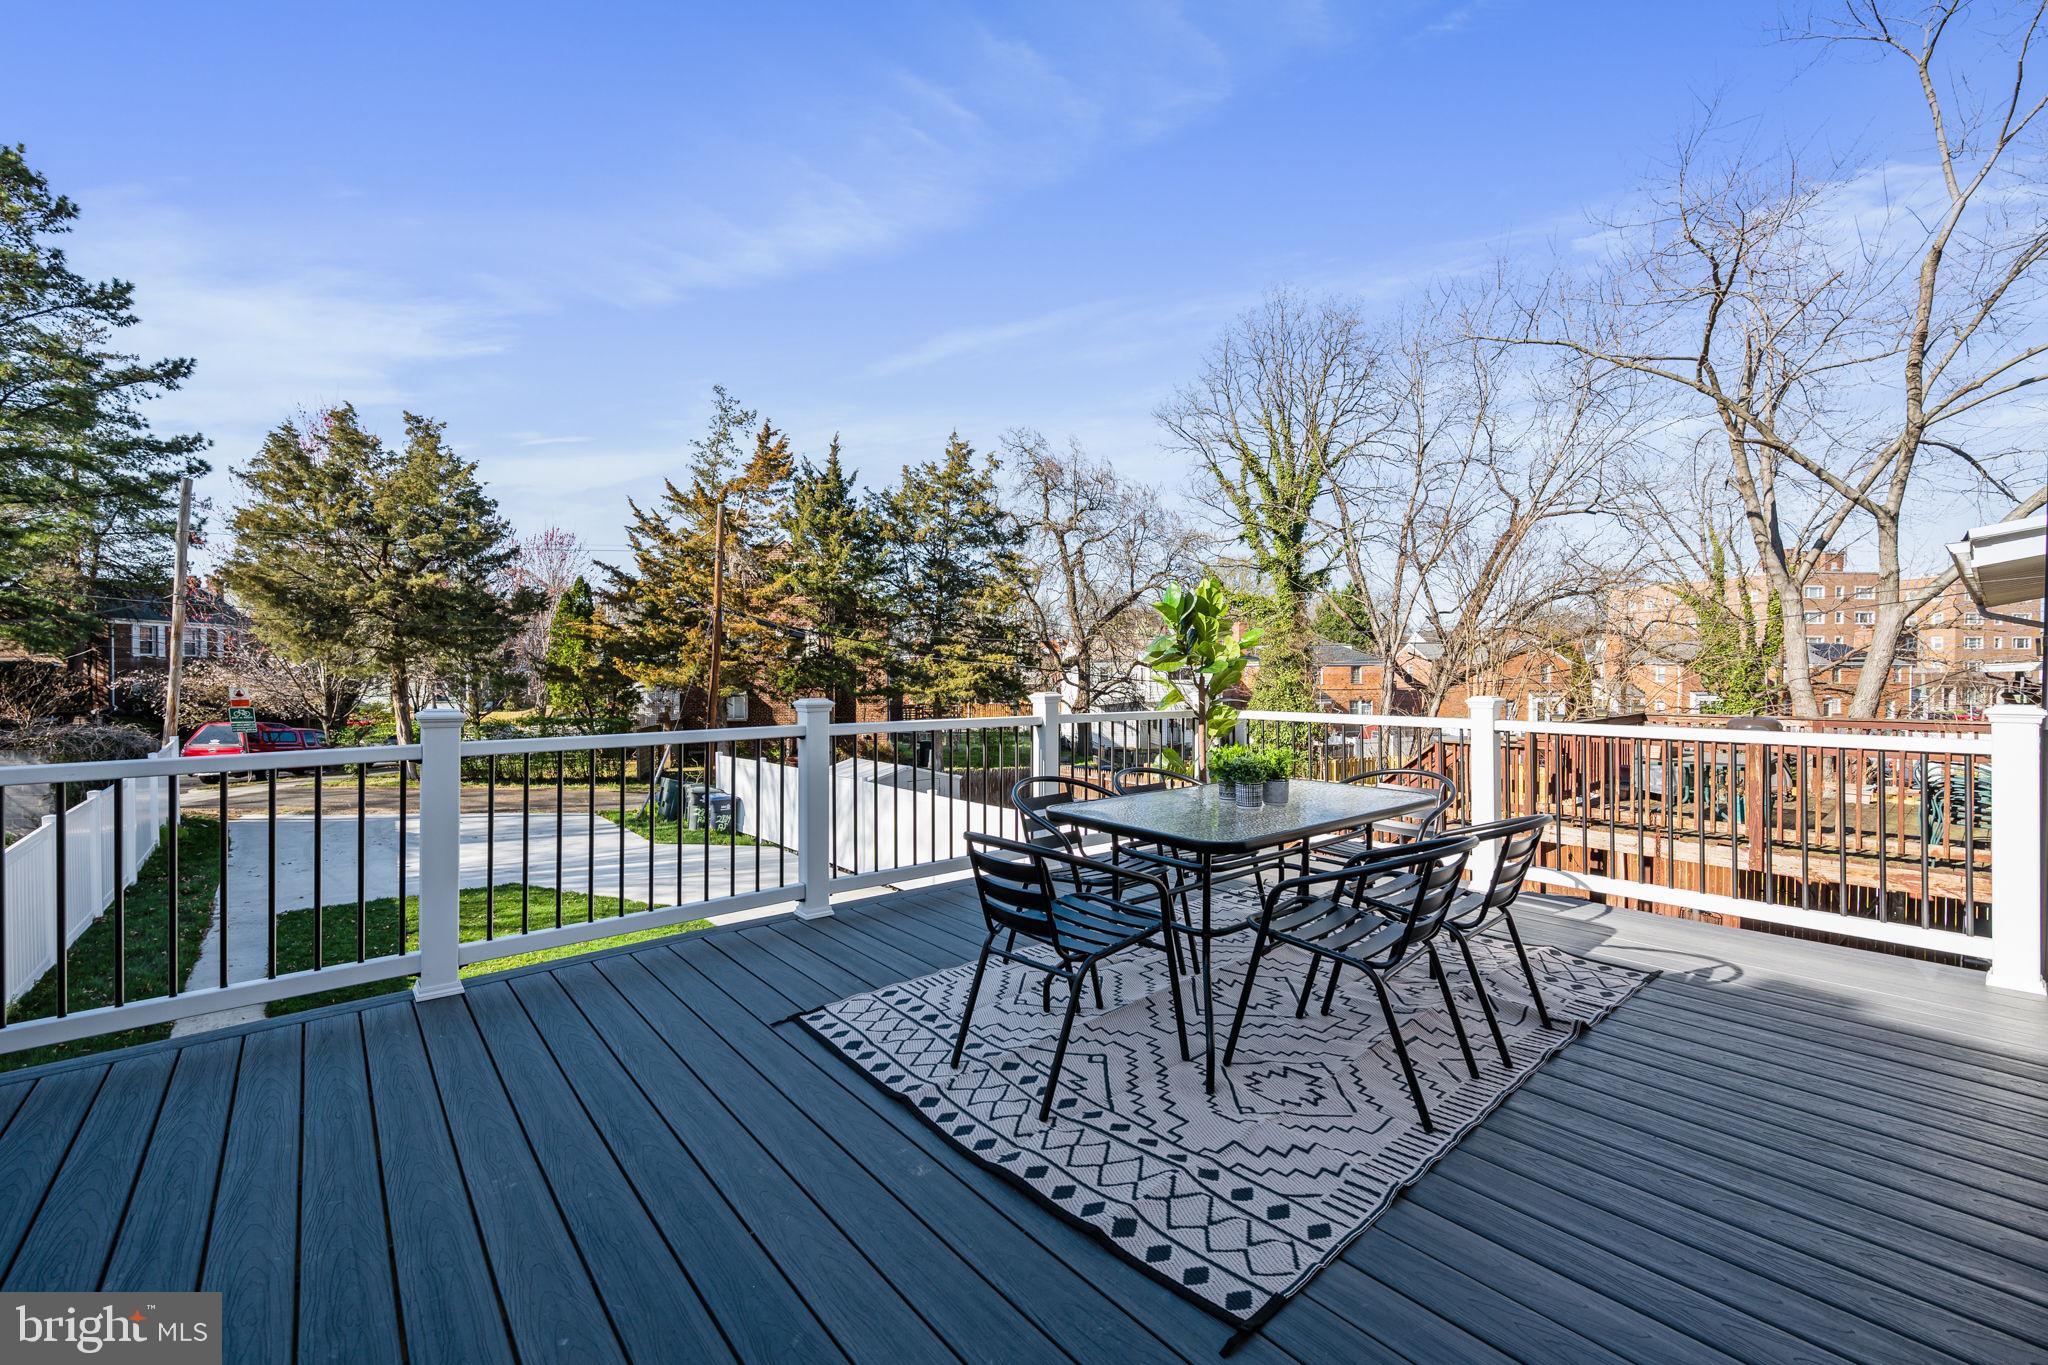 a view of a roof deck with table and chairs a barbeque with wooden floor and fence